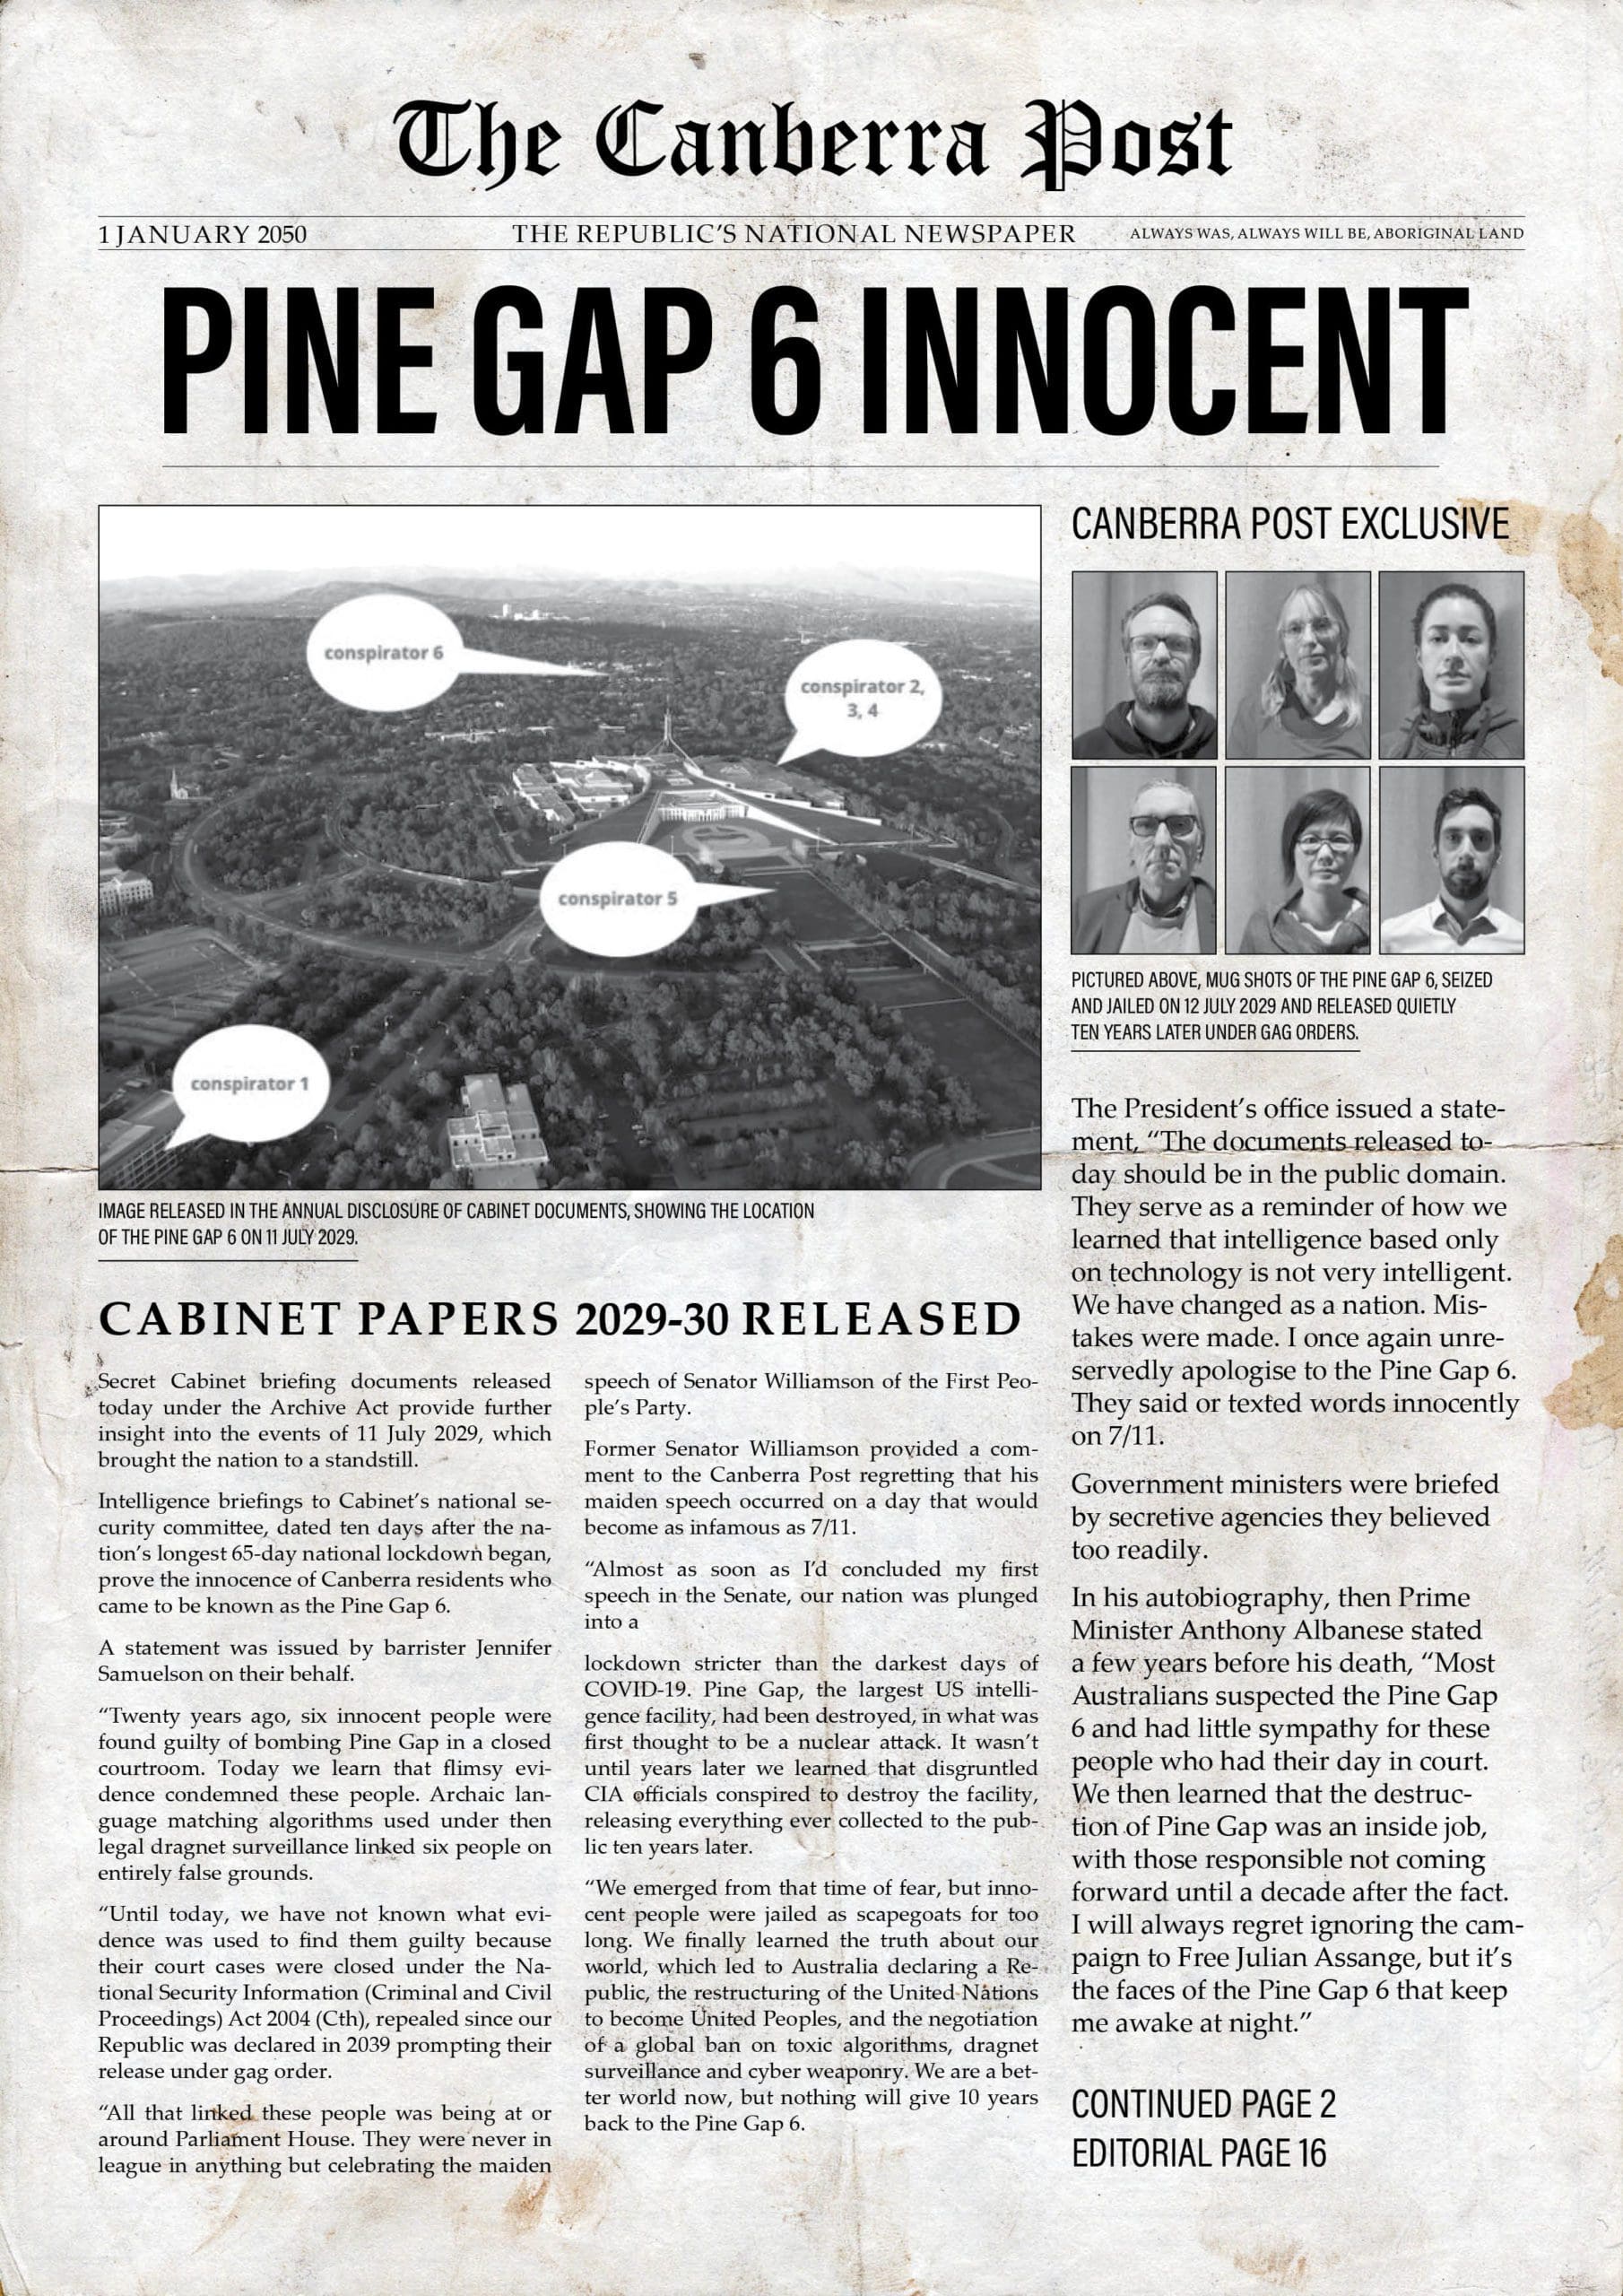 Newspaper article from the future: The Canberra Post, 1 January 2050, The Republic's National Newspaper, Always Was Always Will Be Aboriginal Land. 'Pine Gap 6 Innocent'. 